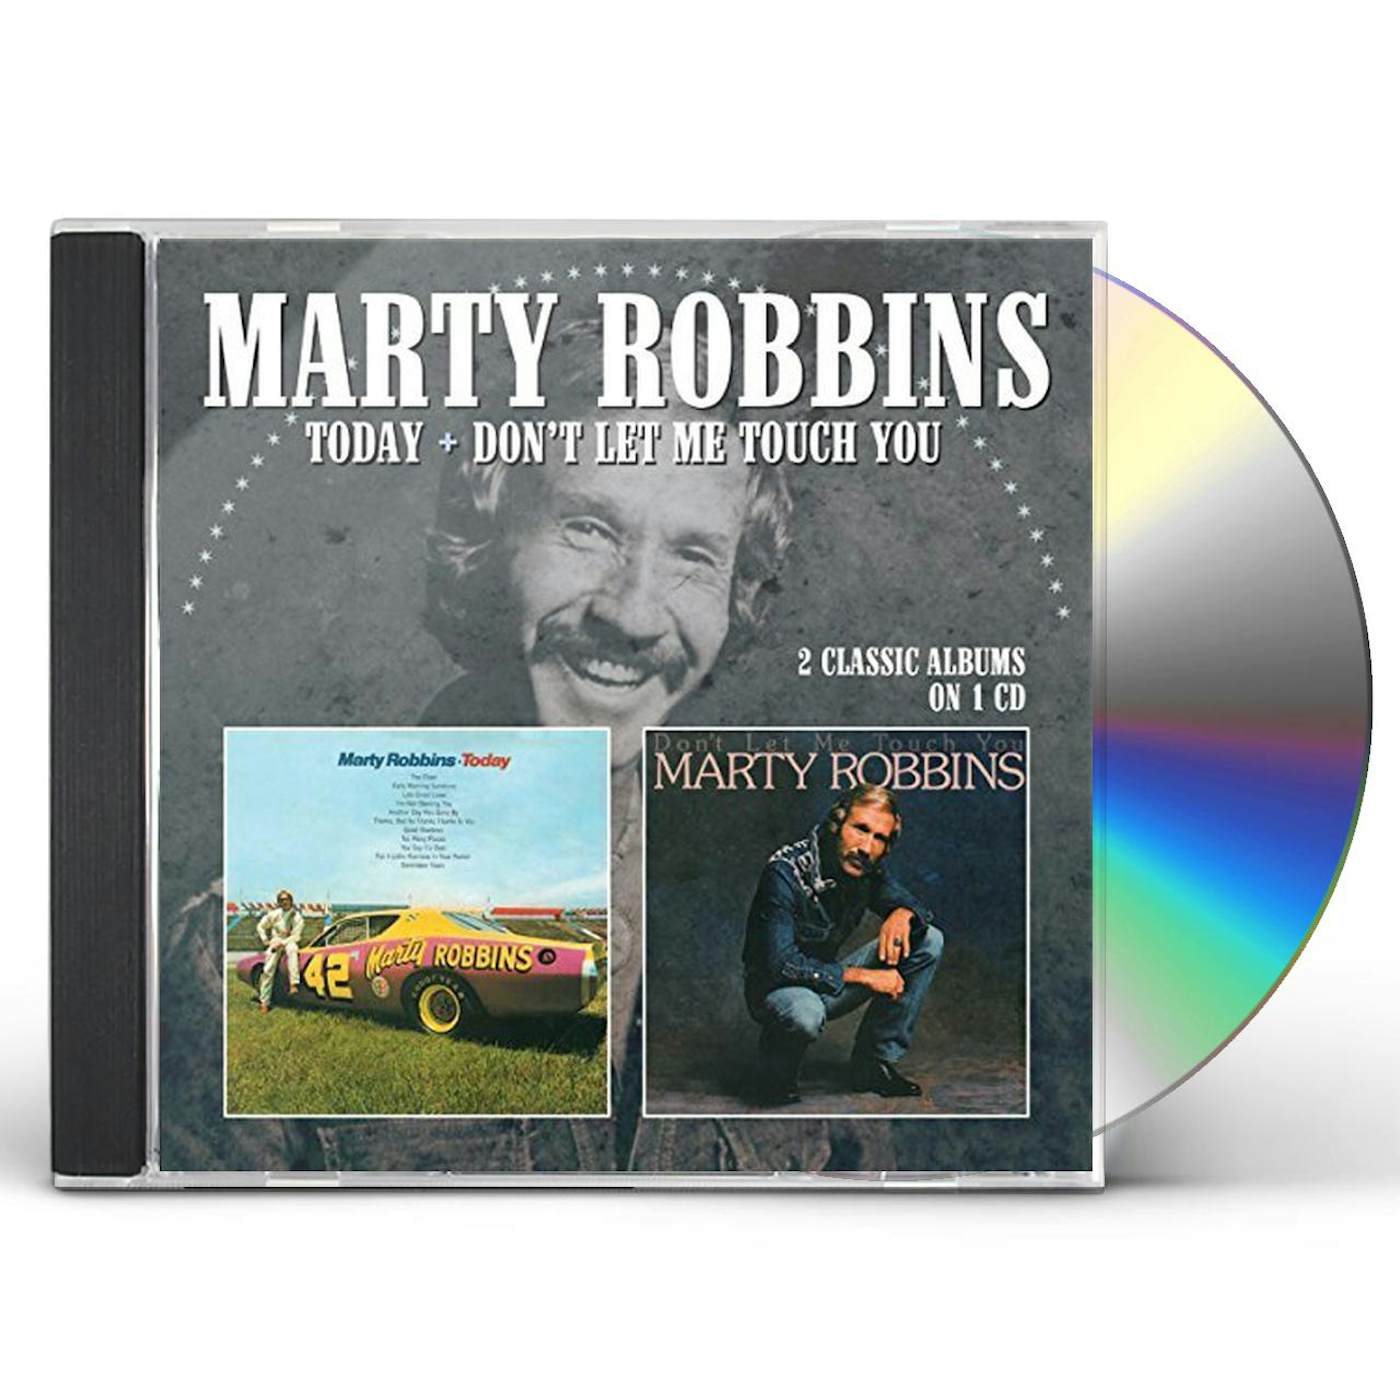 Marty Robbins TODAY / DON'T LET ME TOUCH YOU CD